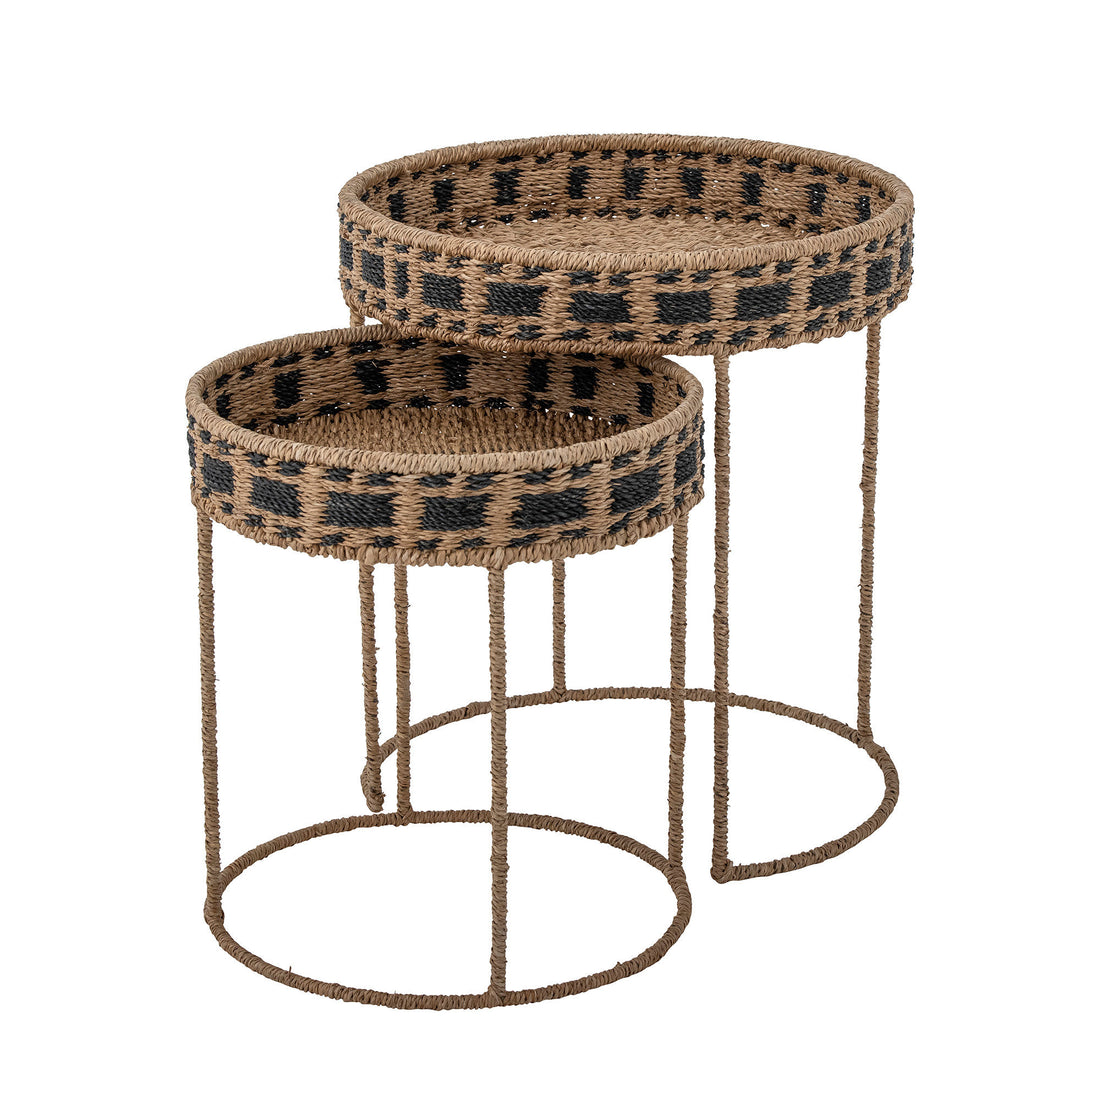 Creative Collection Nore Tray Table, Brown, Bankuan Grass